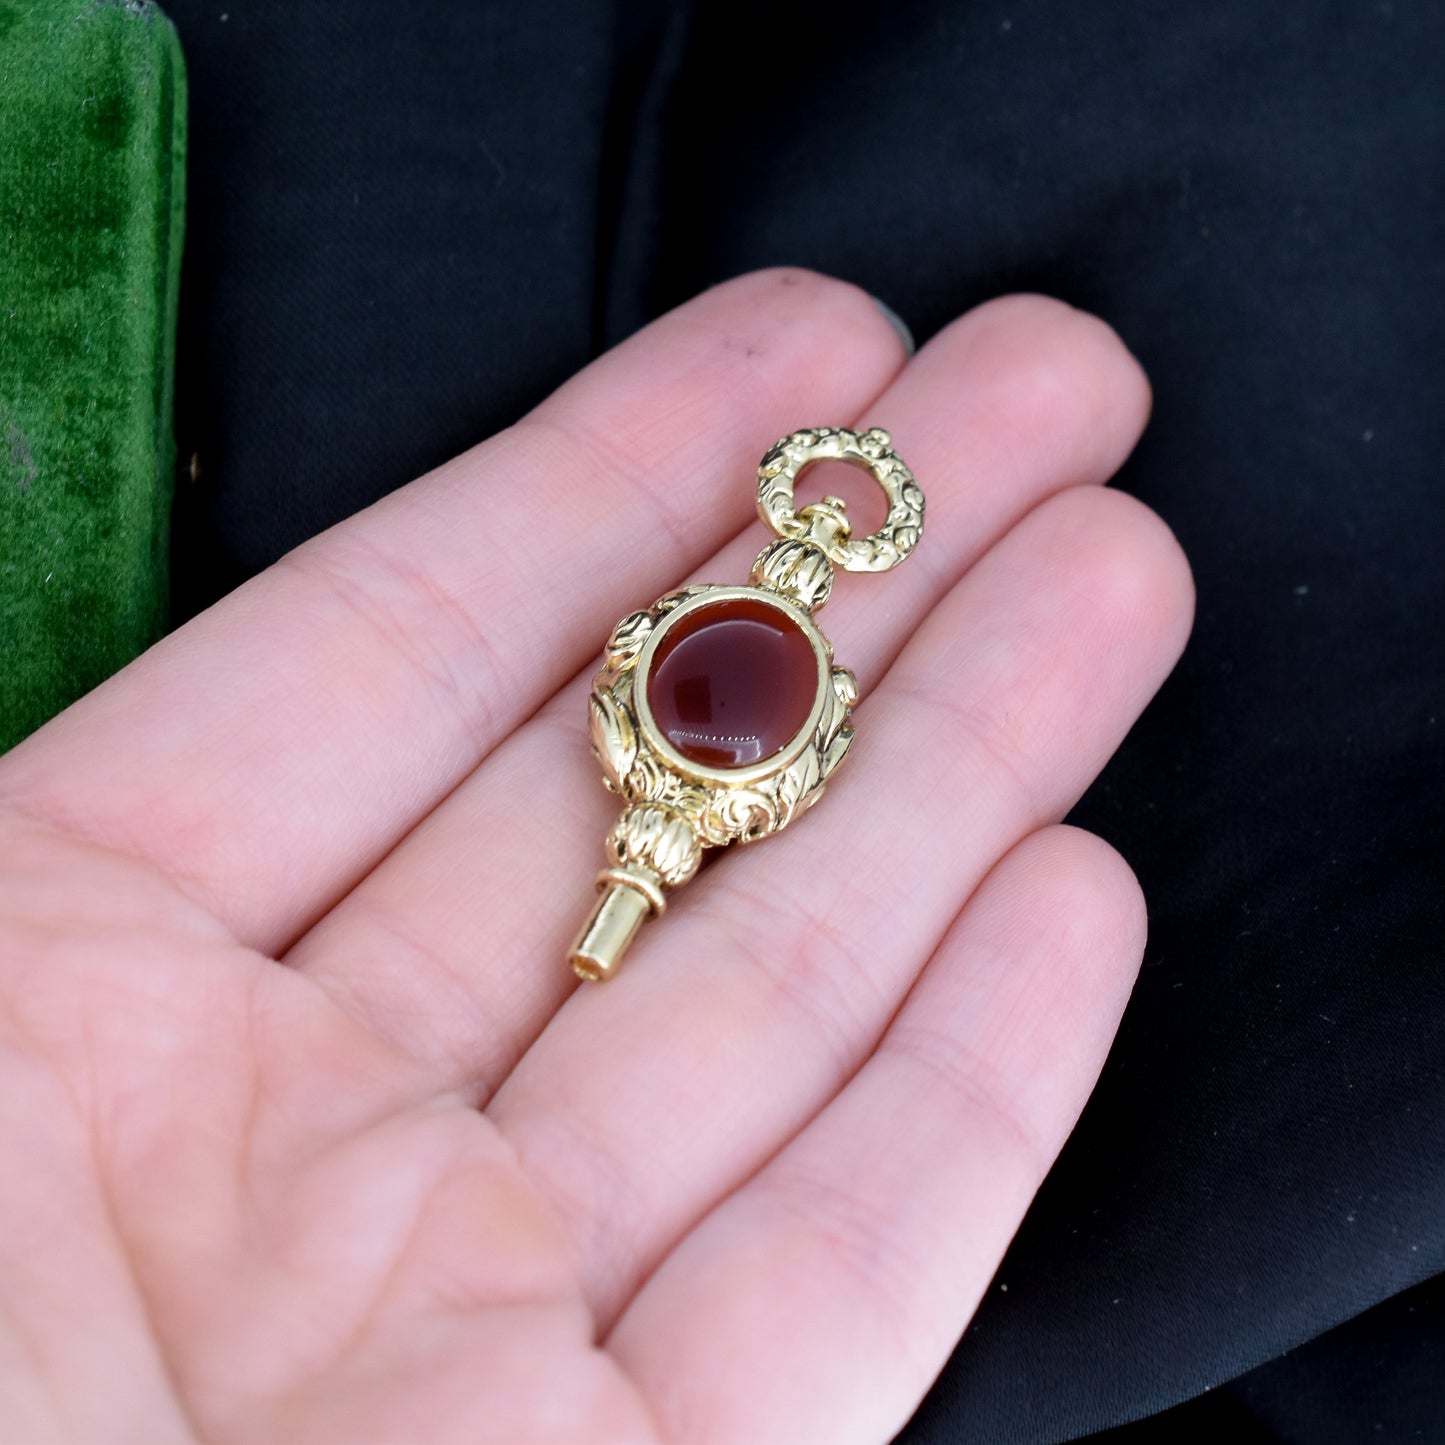 Agate Embossed Gold Watch Key Fob Pendant Charm - Antique Style